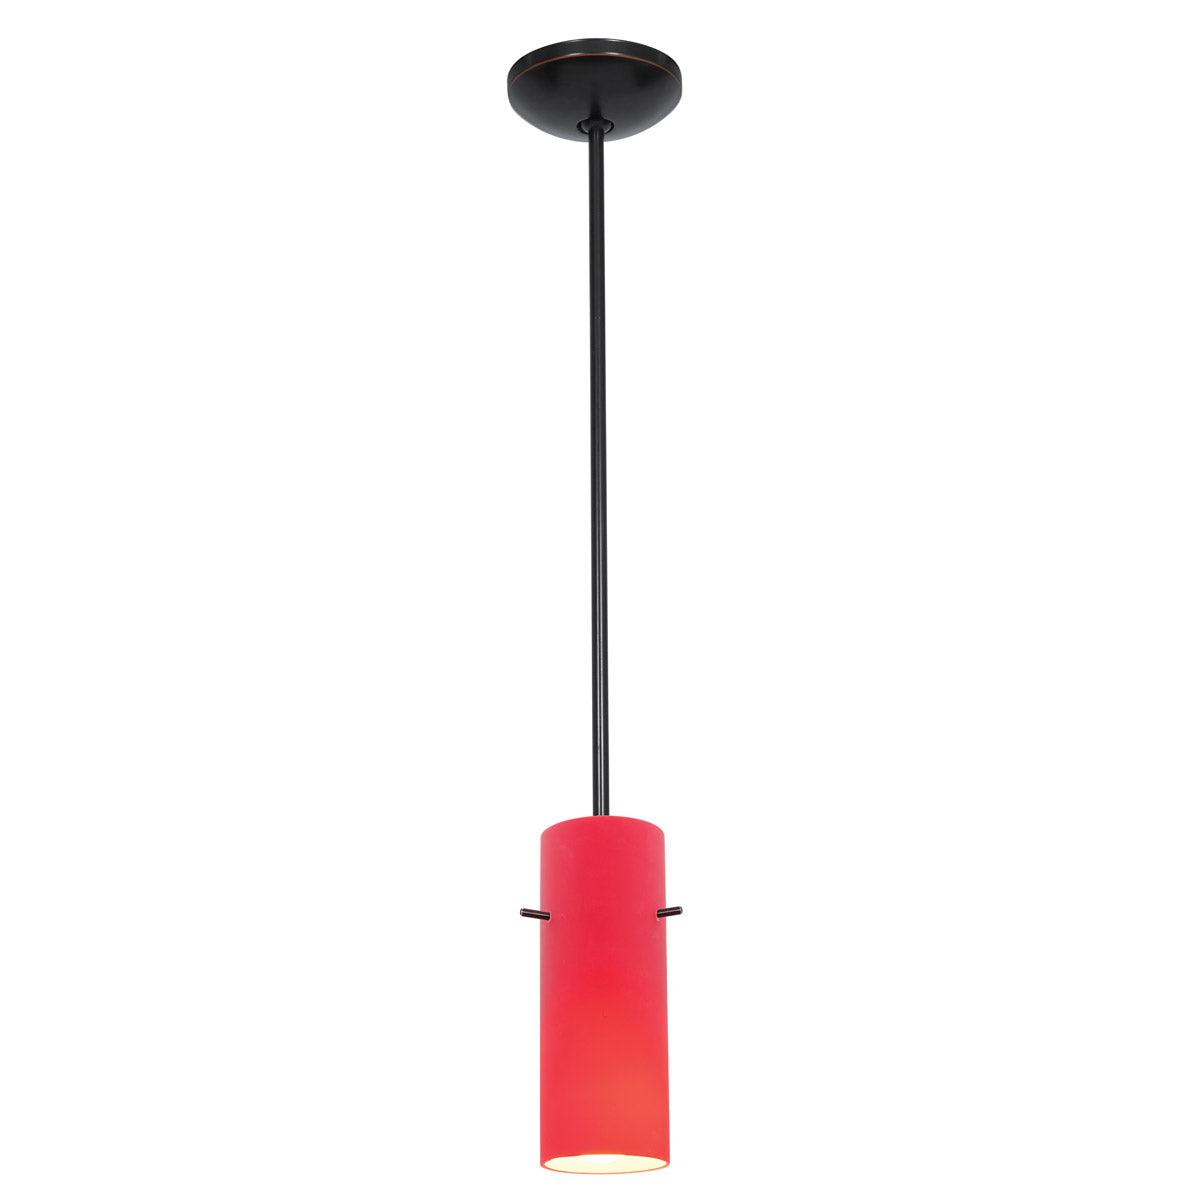 Cylinder 4 in. LED Pendant Light, Red Glass